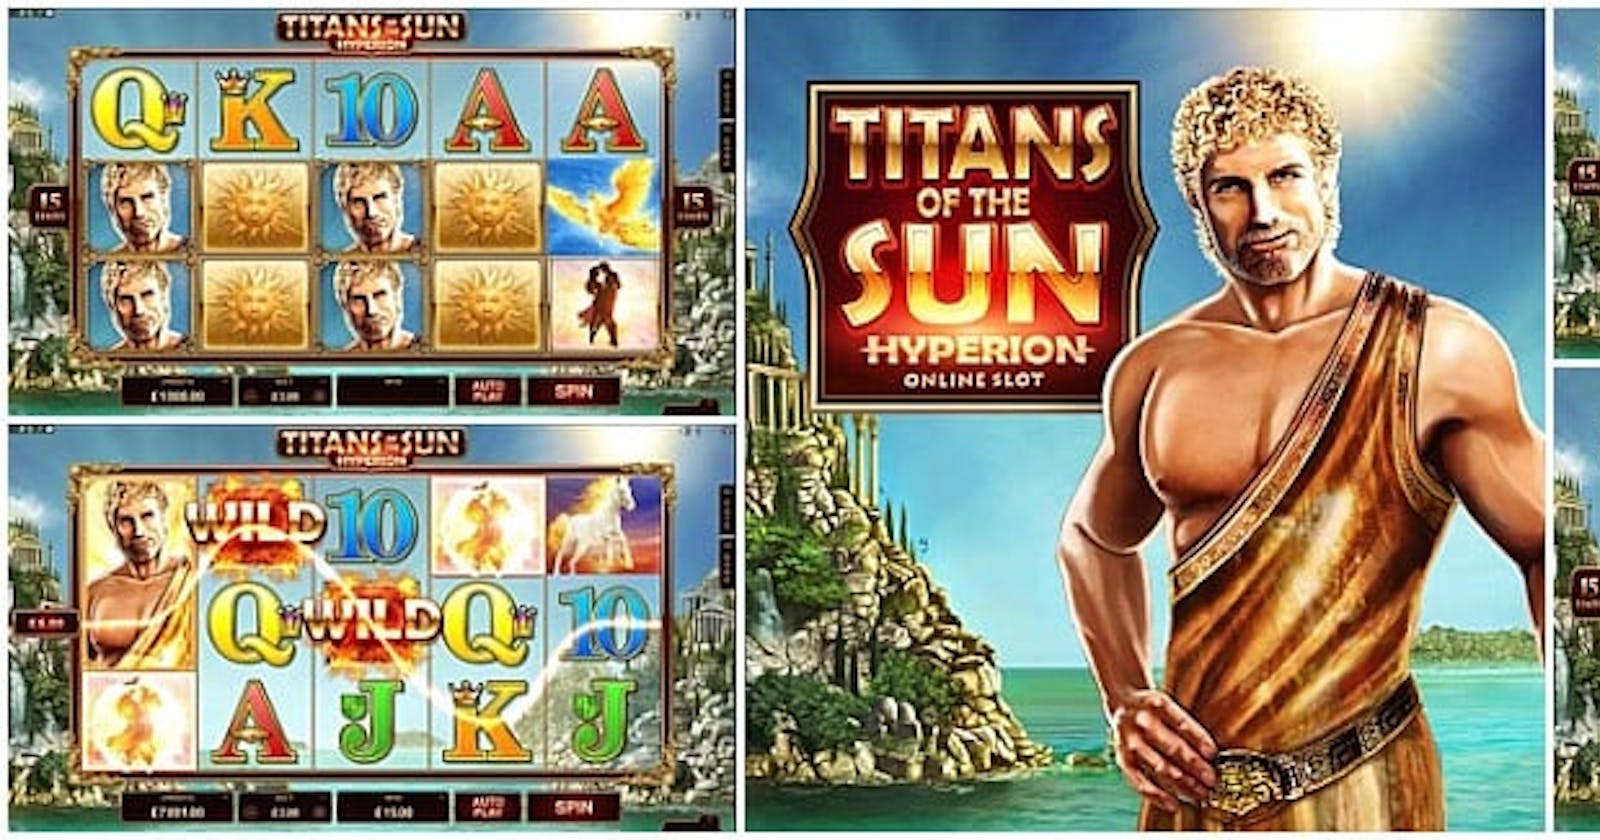 Titans of the Sun Hyperion Slot Review - RTP 96.71%